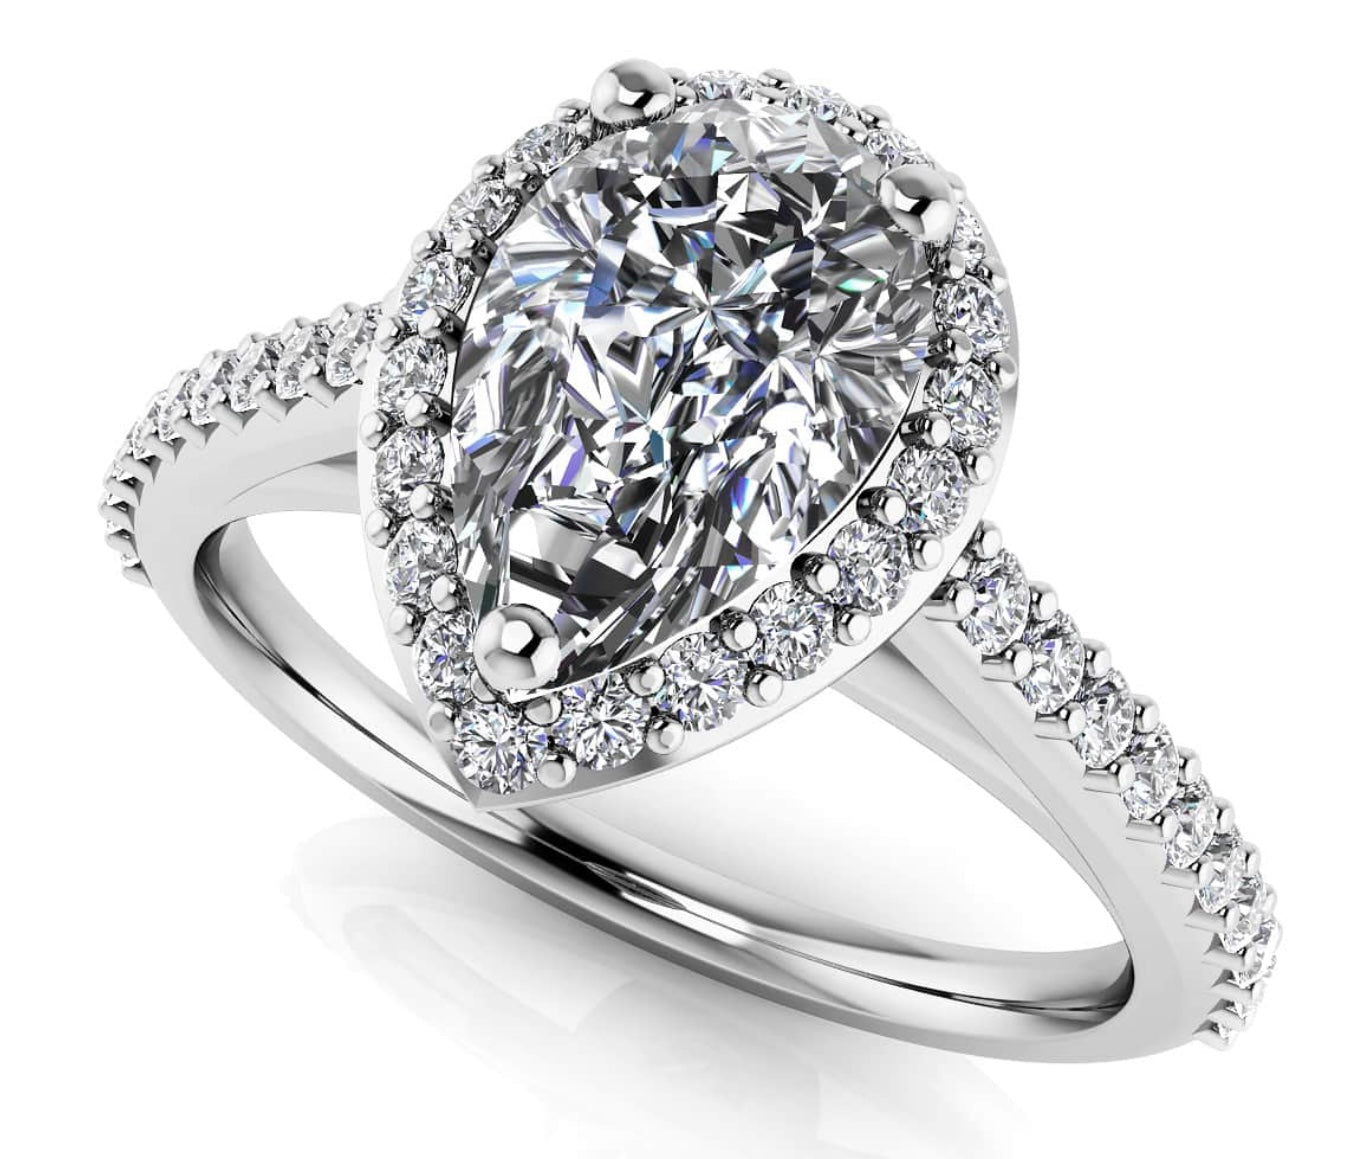 Romantic Pear Shaped With Halo Diamonds Ring